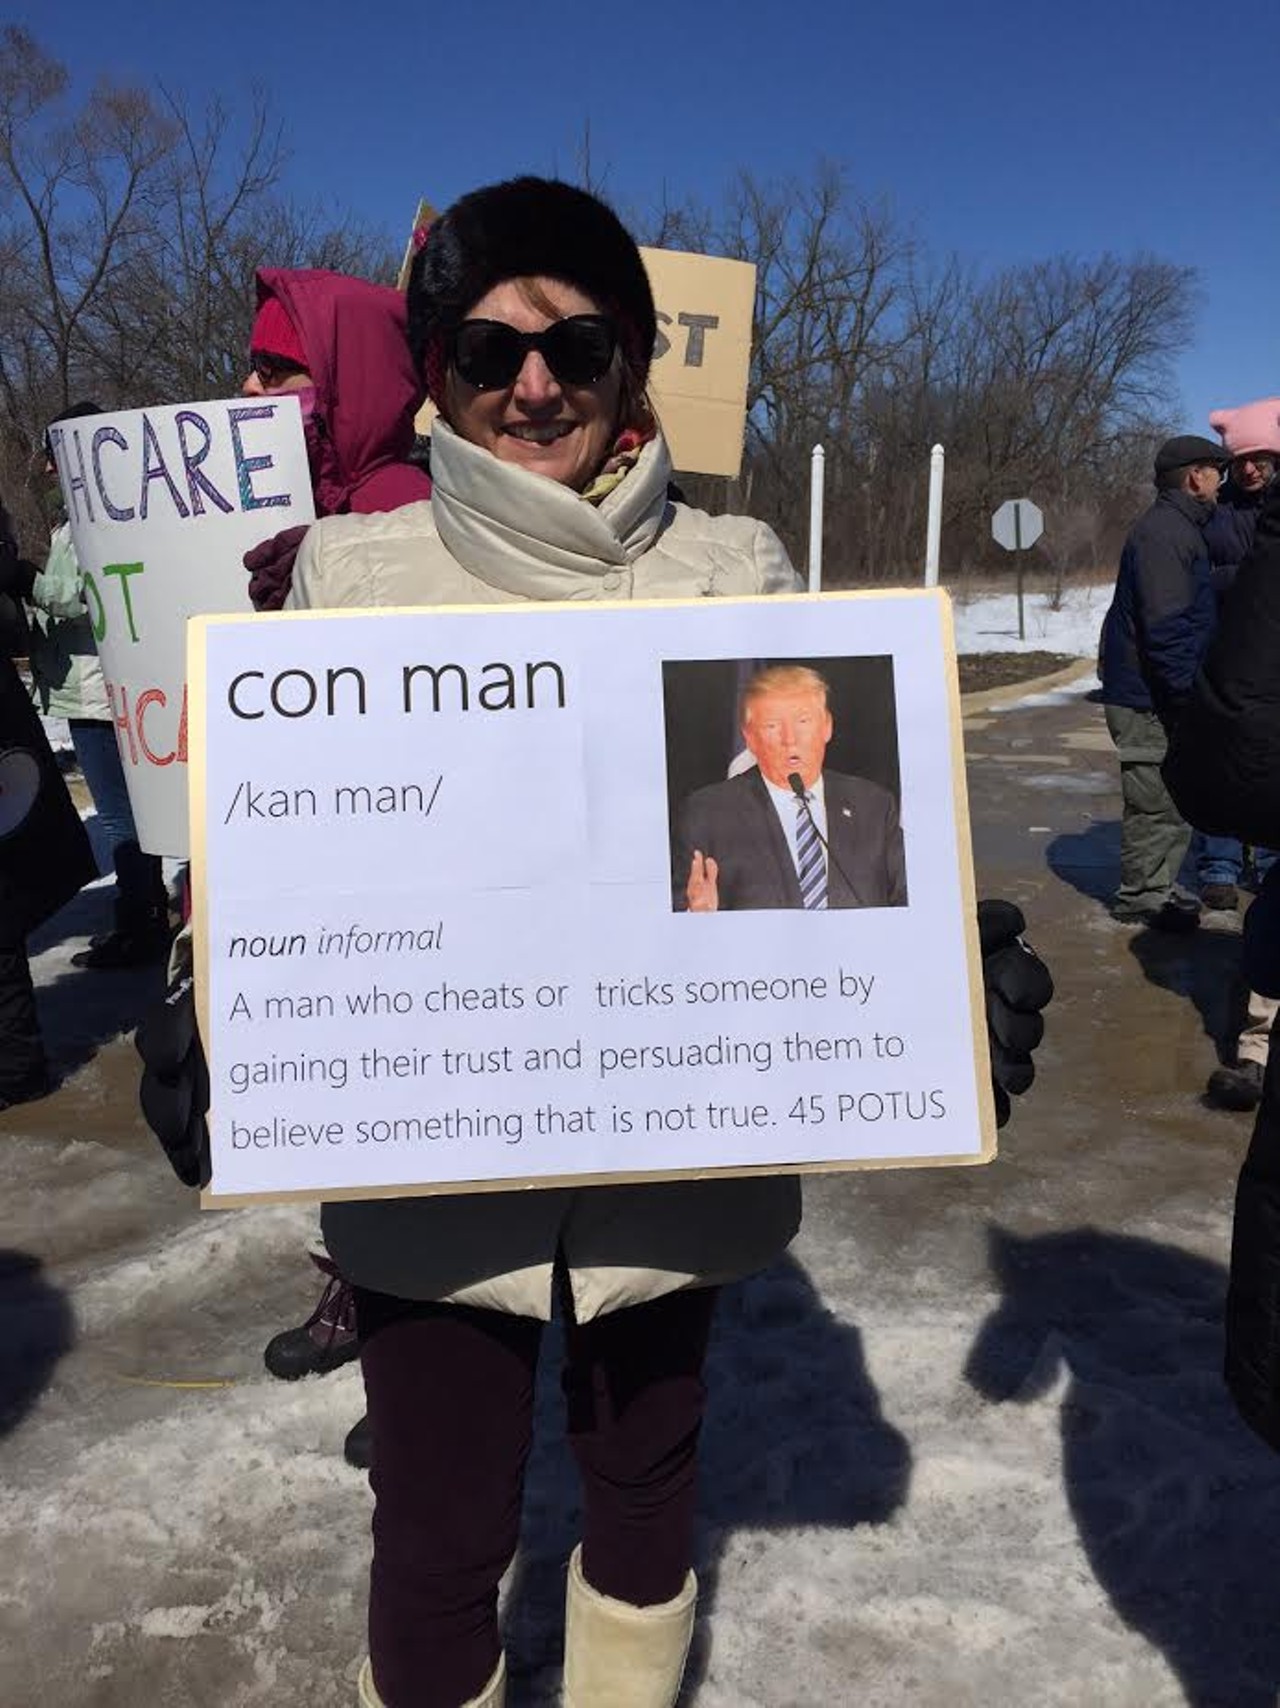 The 17 best protest signs we saw at Trump's visit to Ypsilanti